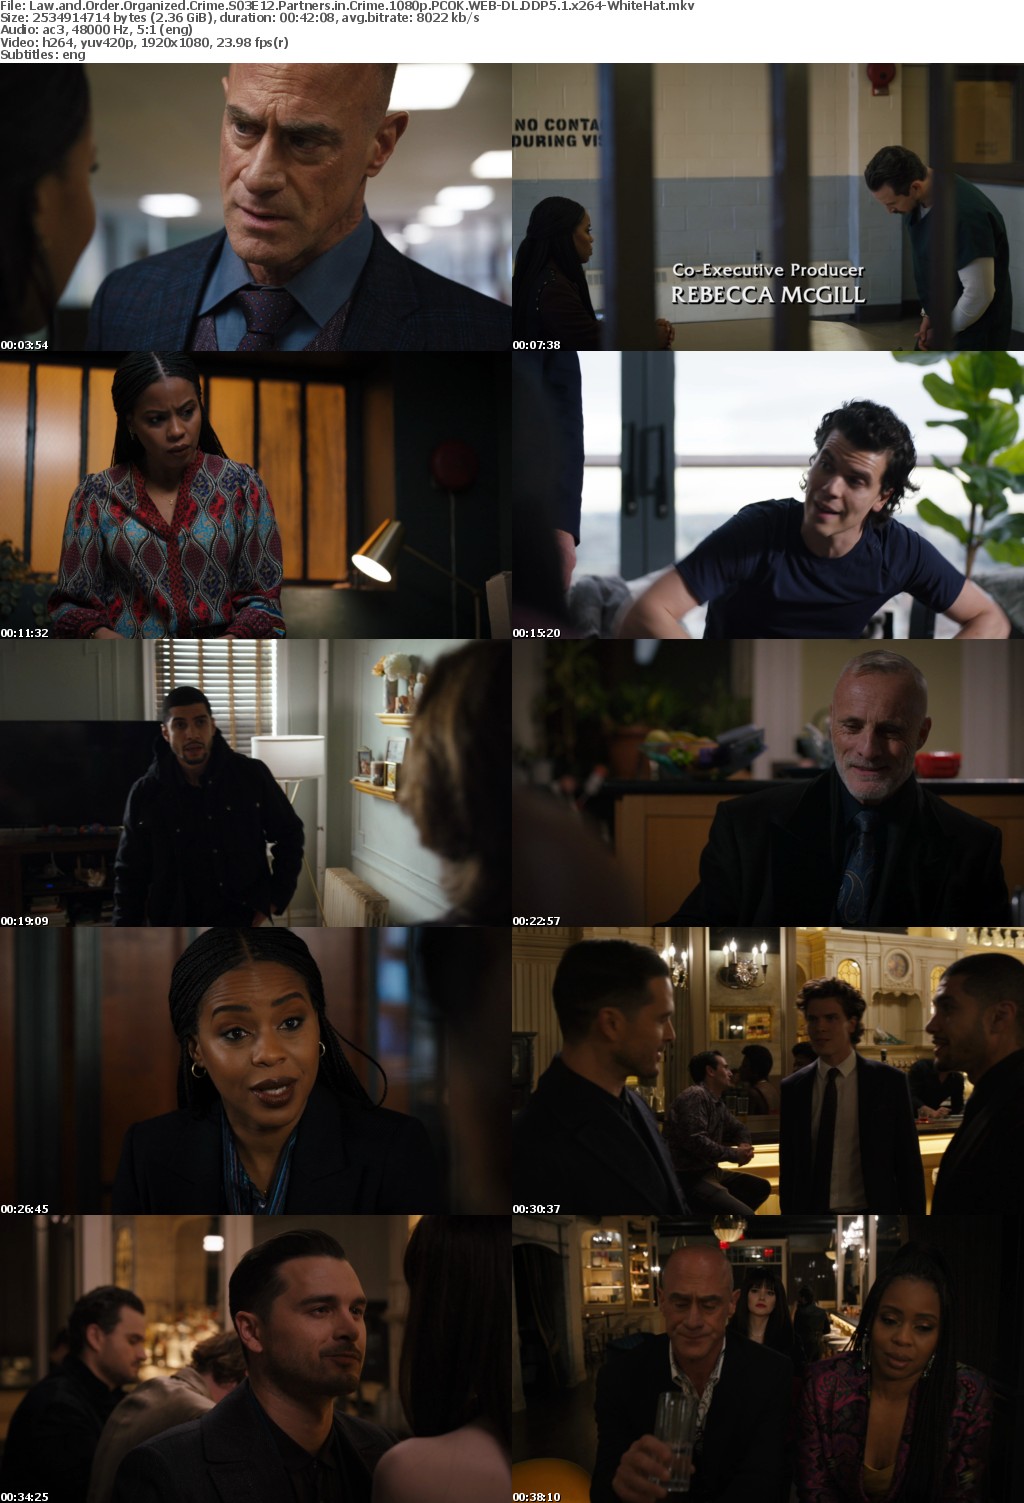 Law and Order Organized Crime S03E12 Partners in Crime 1080p PCOK WEBRip DDP5 1 x264-WhiteHat